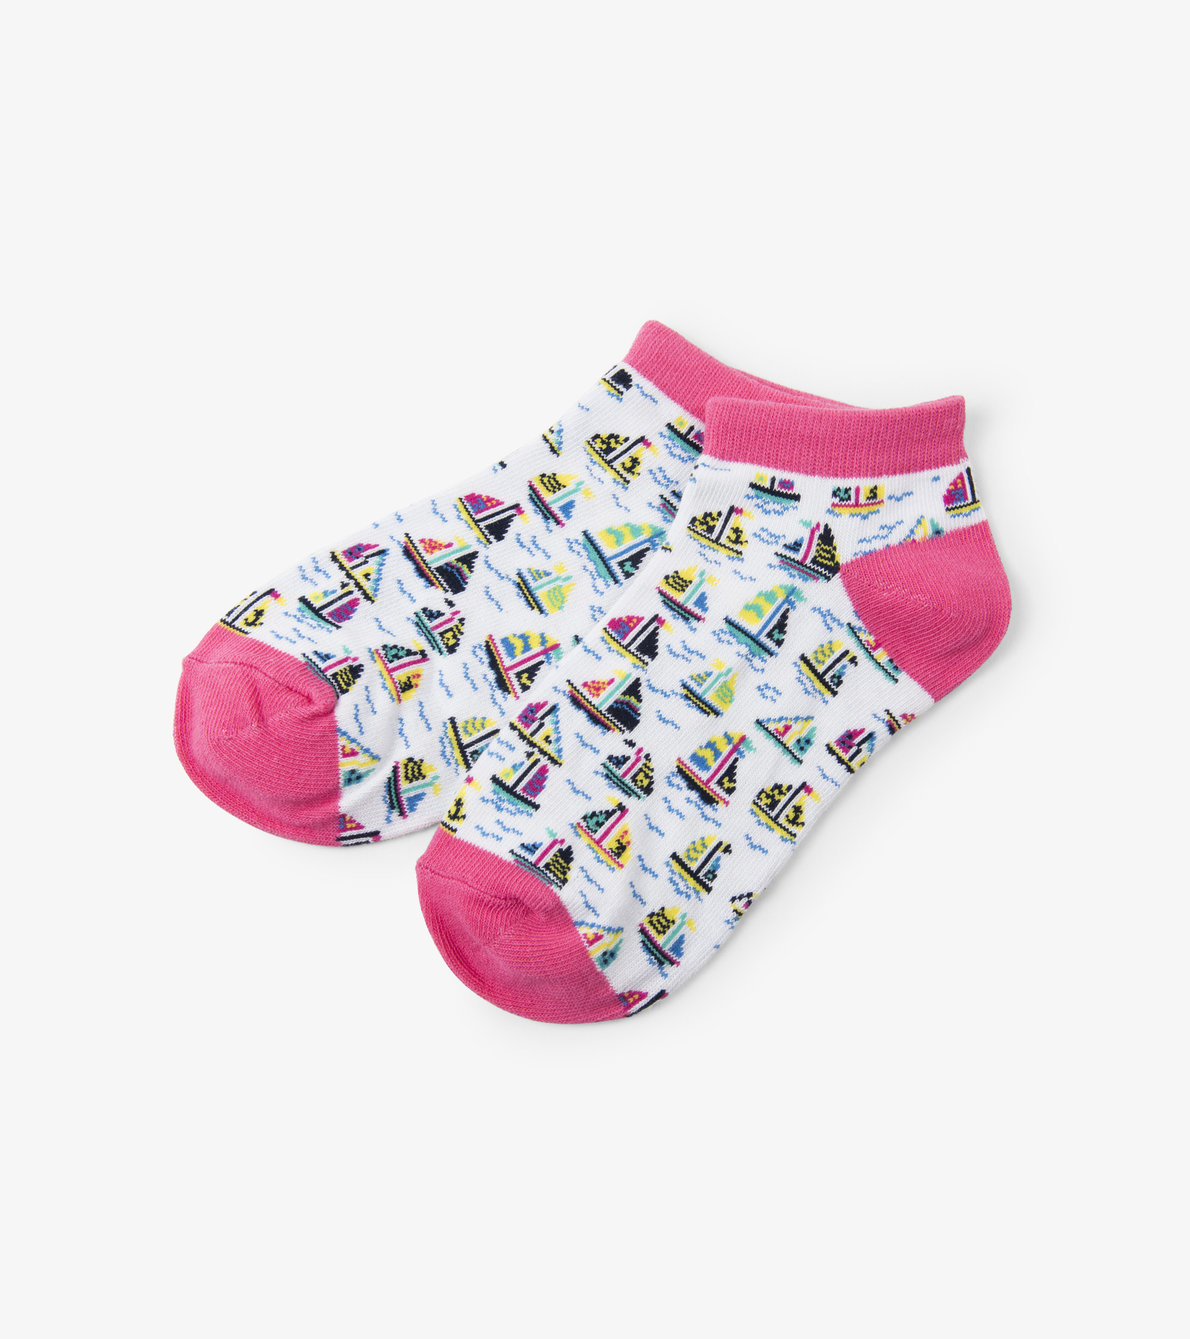 View larger image of Sailboats Women's Ankle Socks